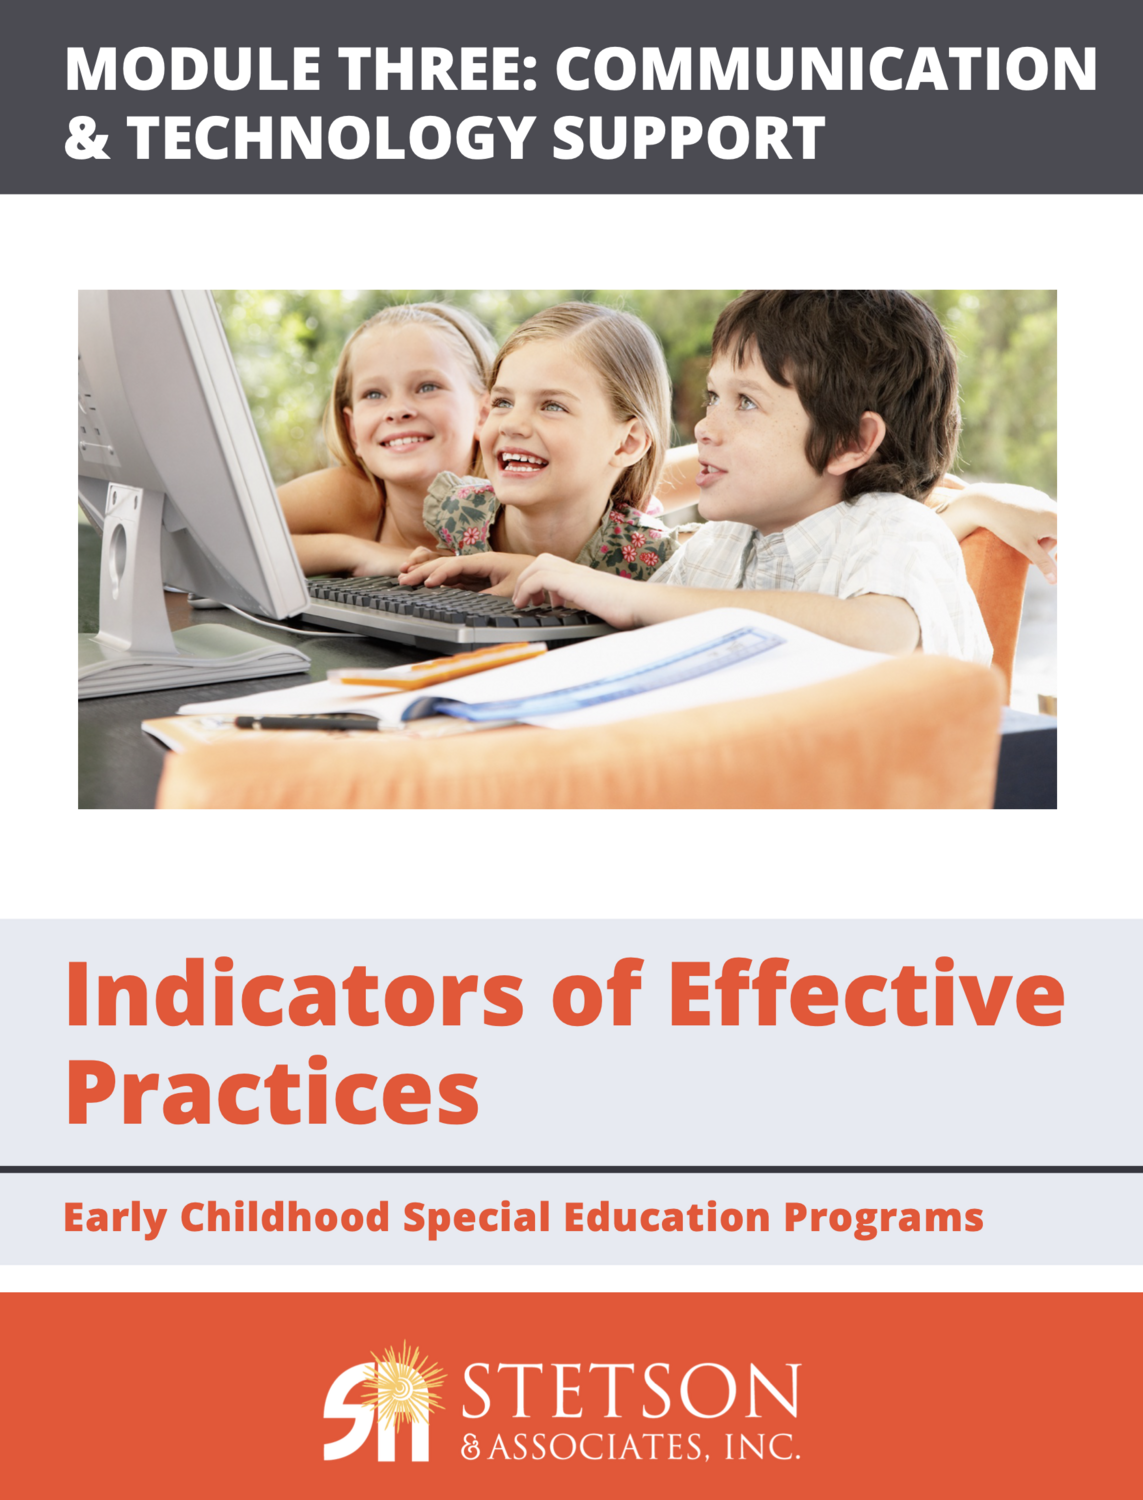 Early Childhood Special Education Programs: Module 3 Communication and Technology Support